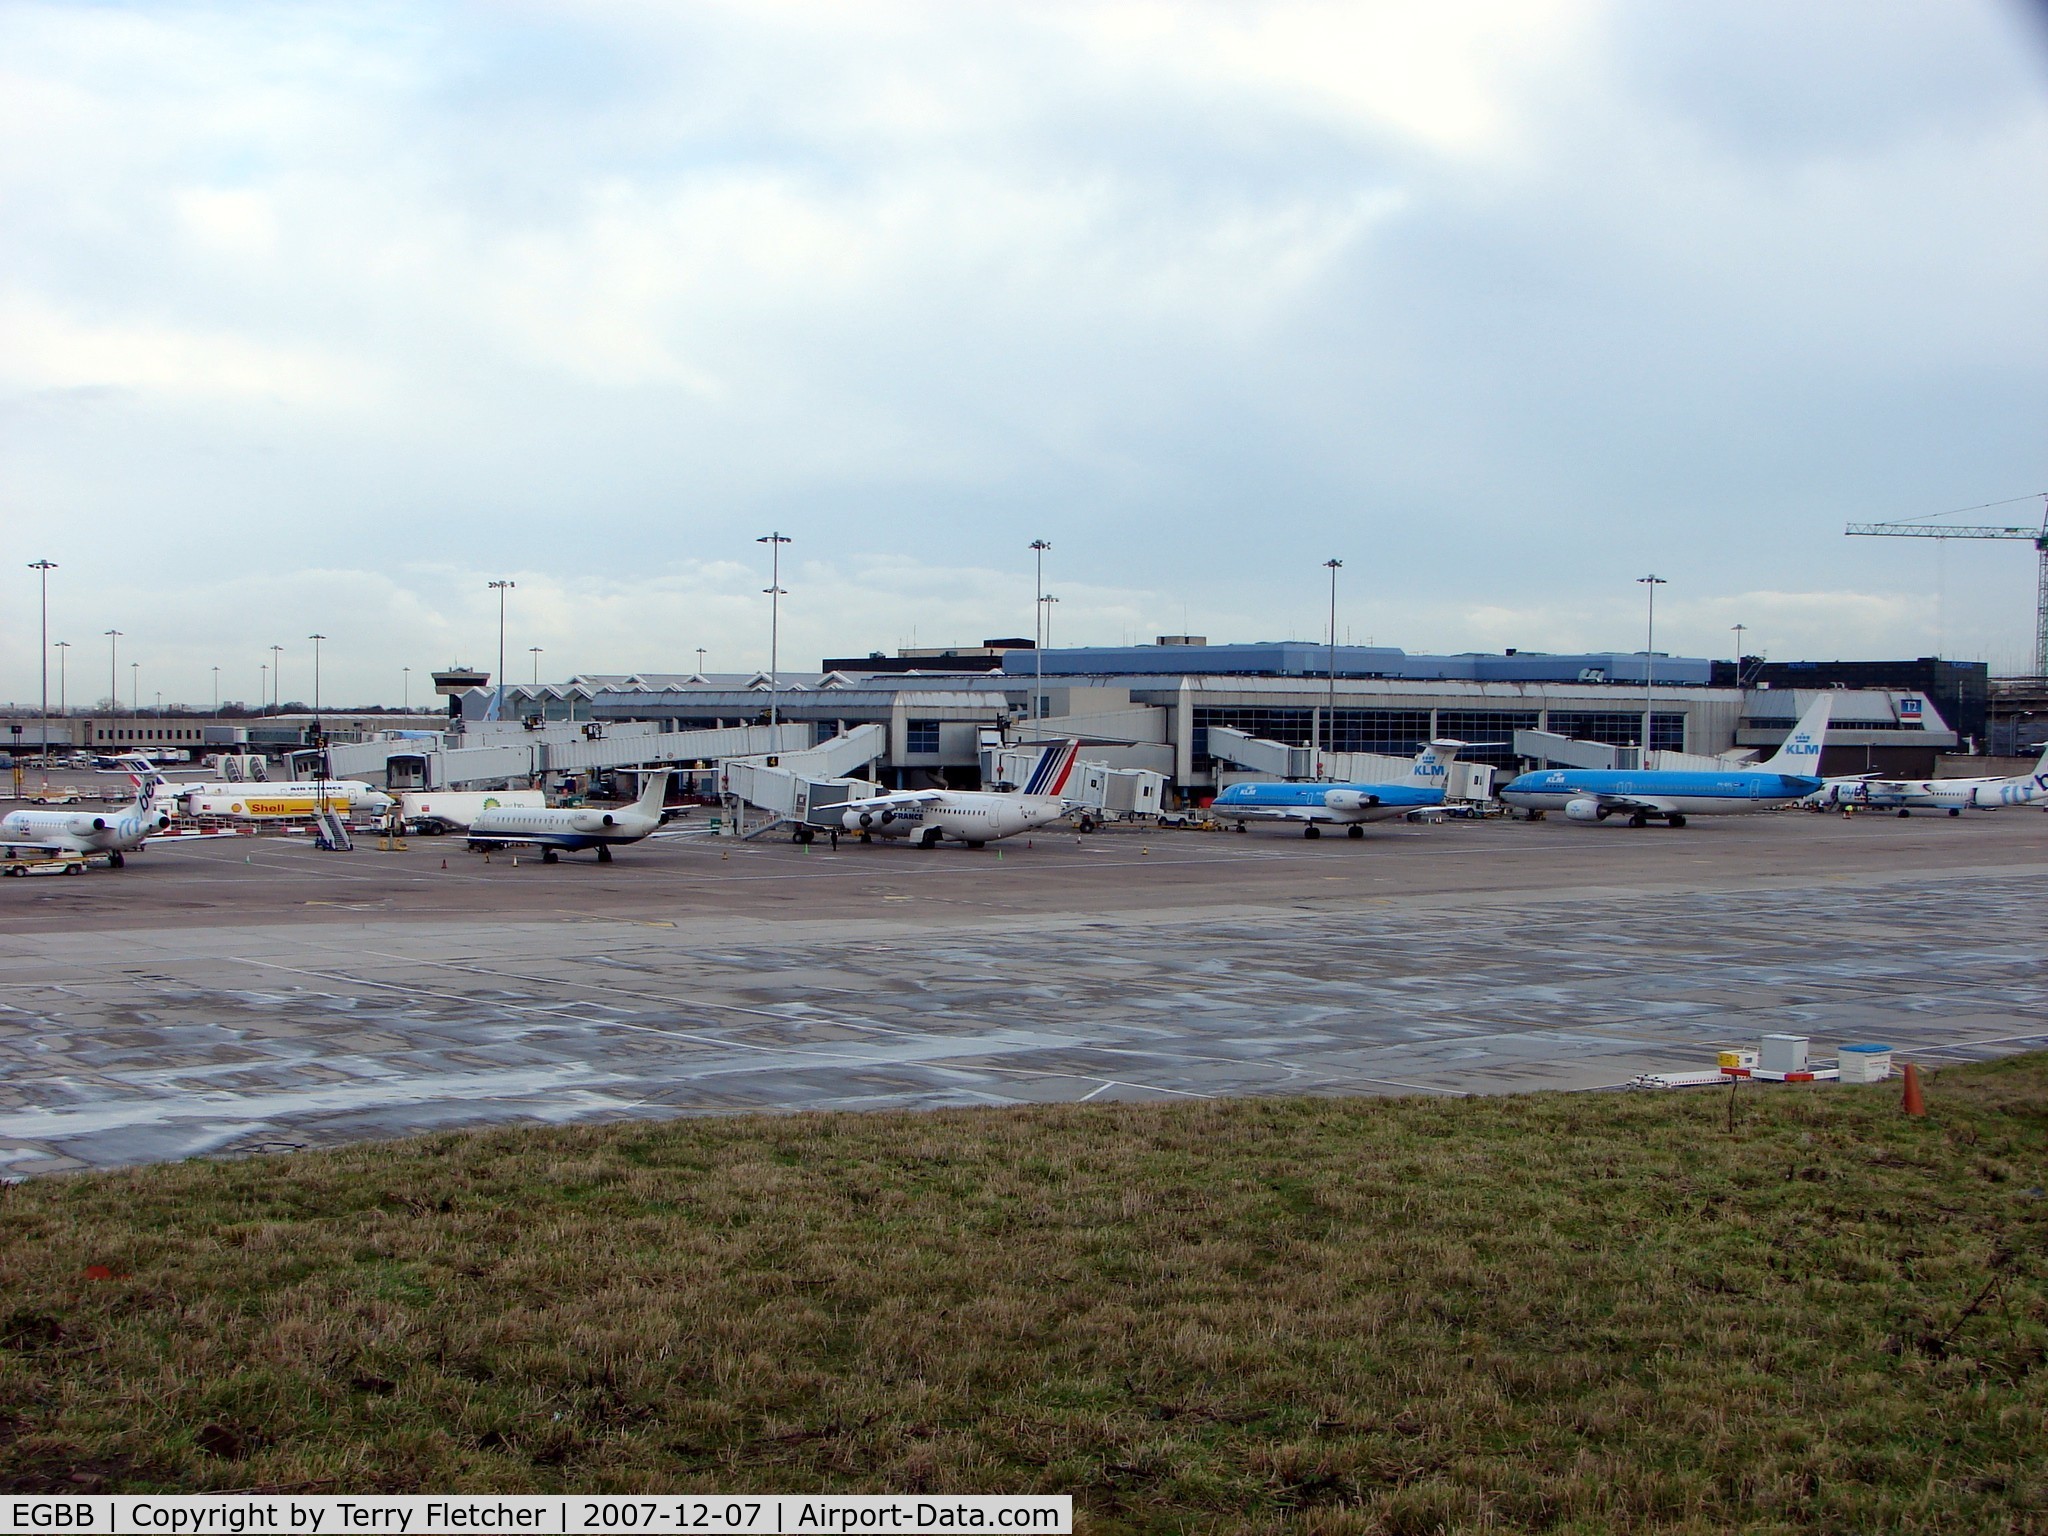 Birmingham International Airport, Birmingham, England United Kingdom (EGBB) - This is Terminal 2 at the current Passenger Terminal at Birmingham used by most of the major European Airlines